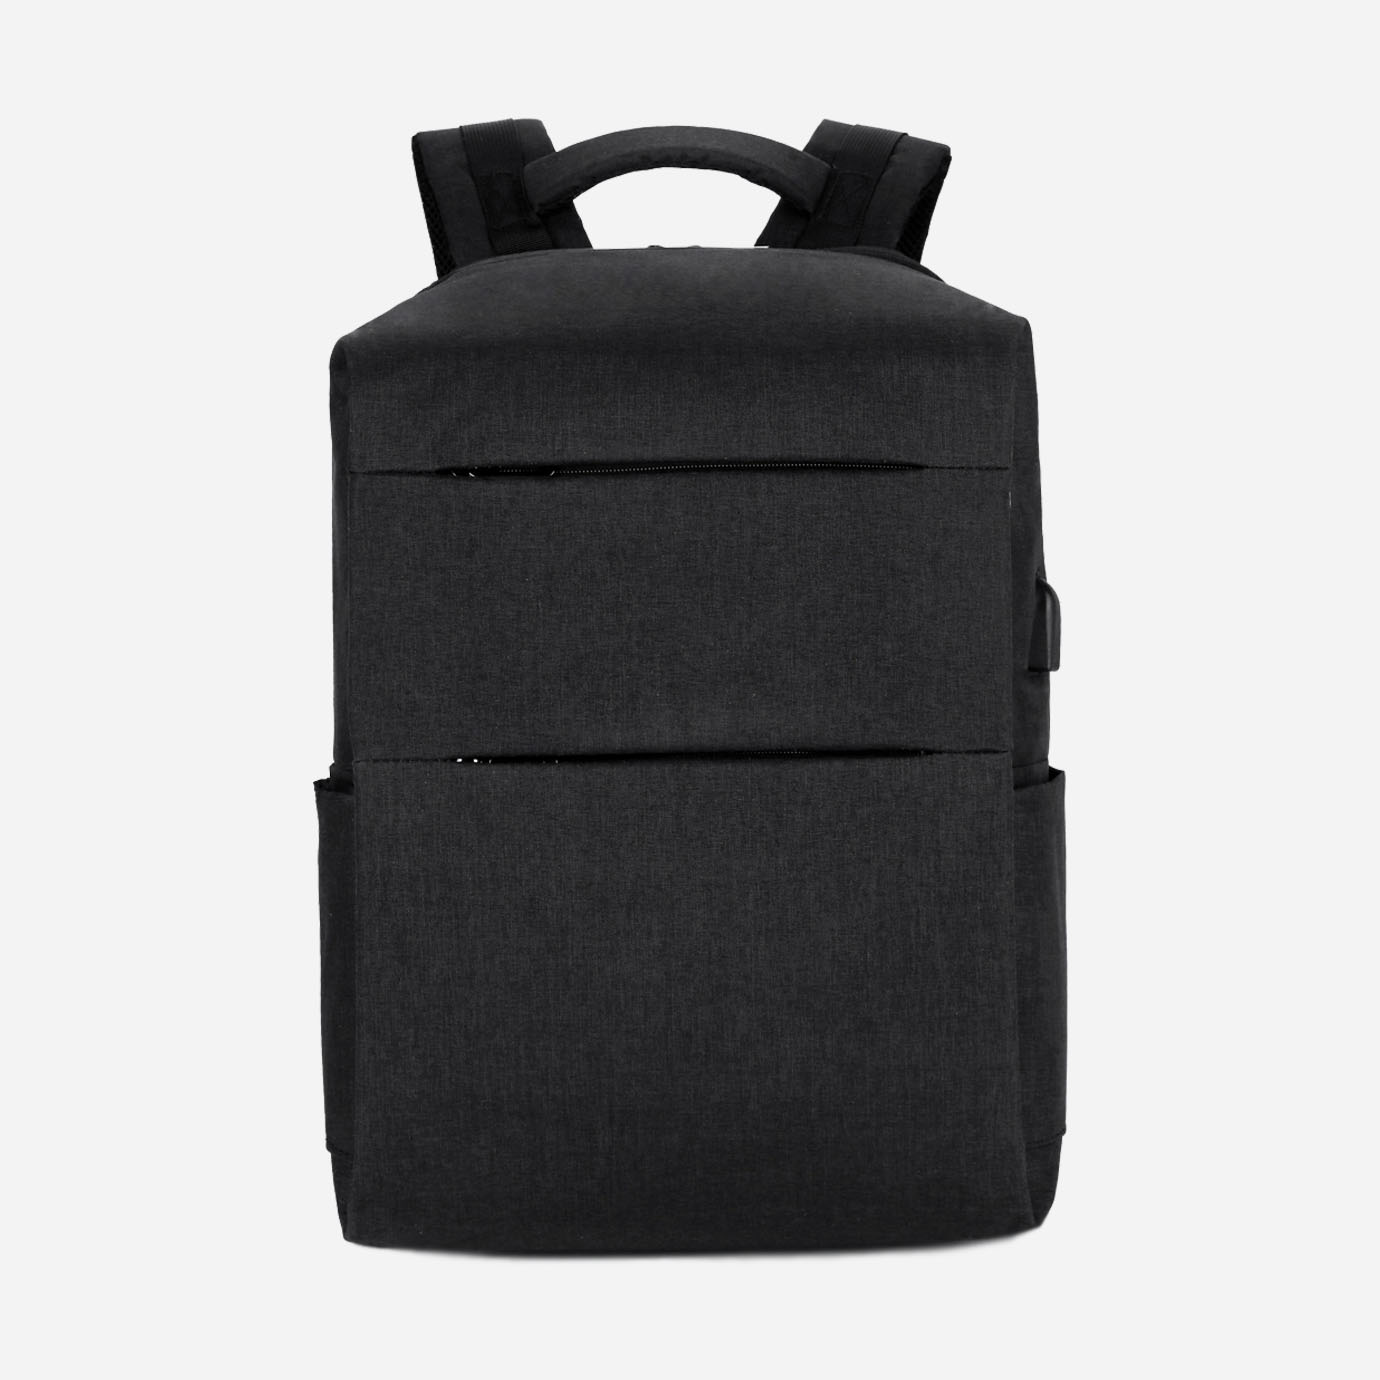 nordace.com | Nordace Nelson – Smart Travel Backpack